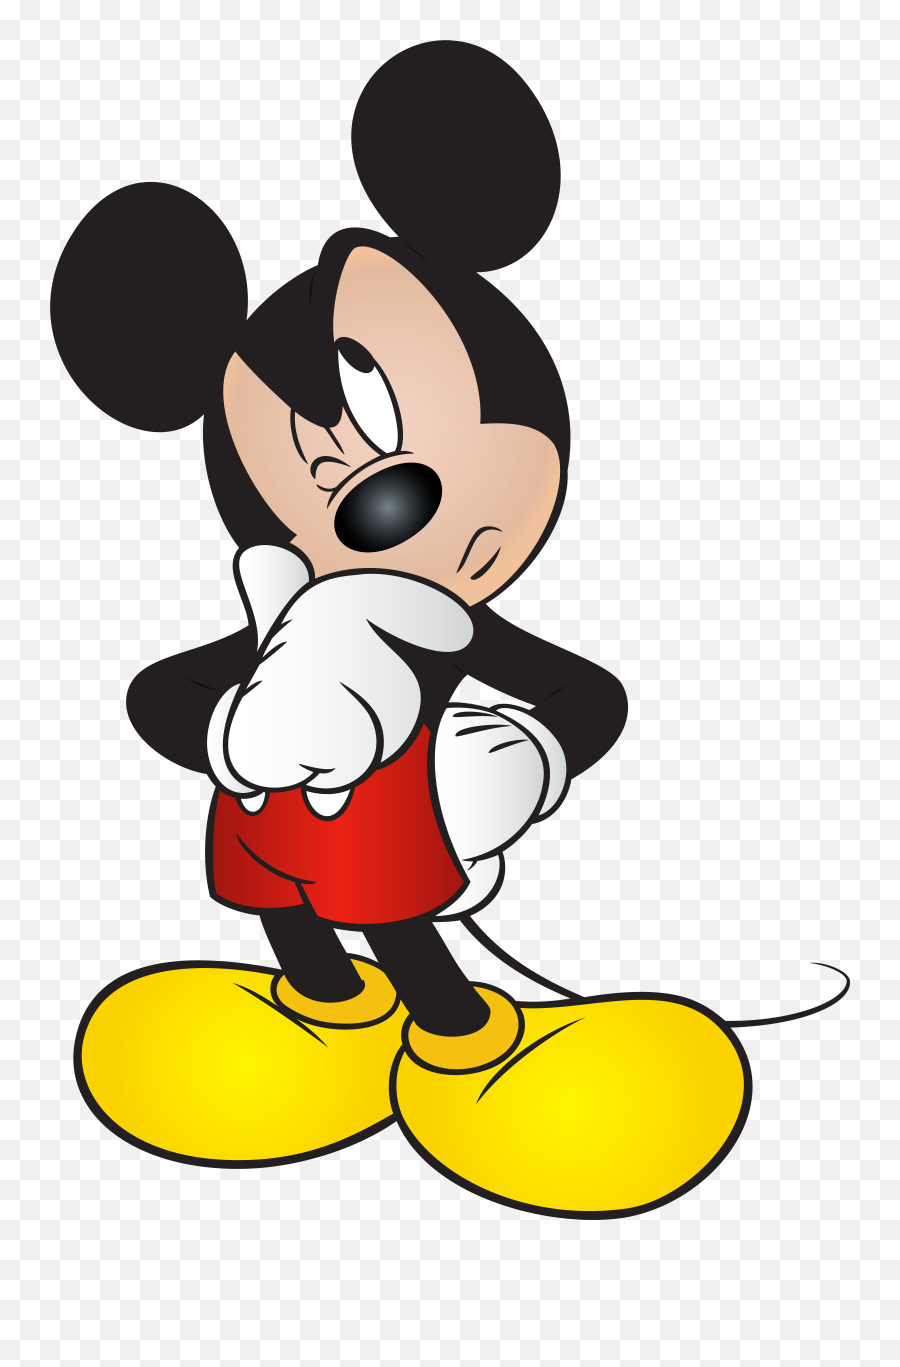 Transparent Mickey Mouse Png Download - Transparent Background Mickey Mouse Thinking Emoji,Mickey Png